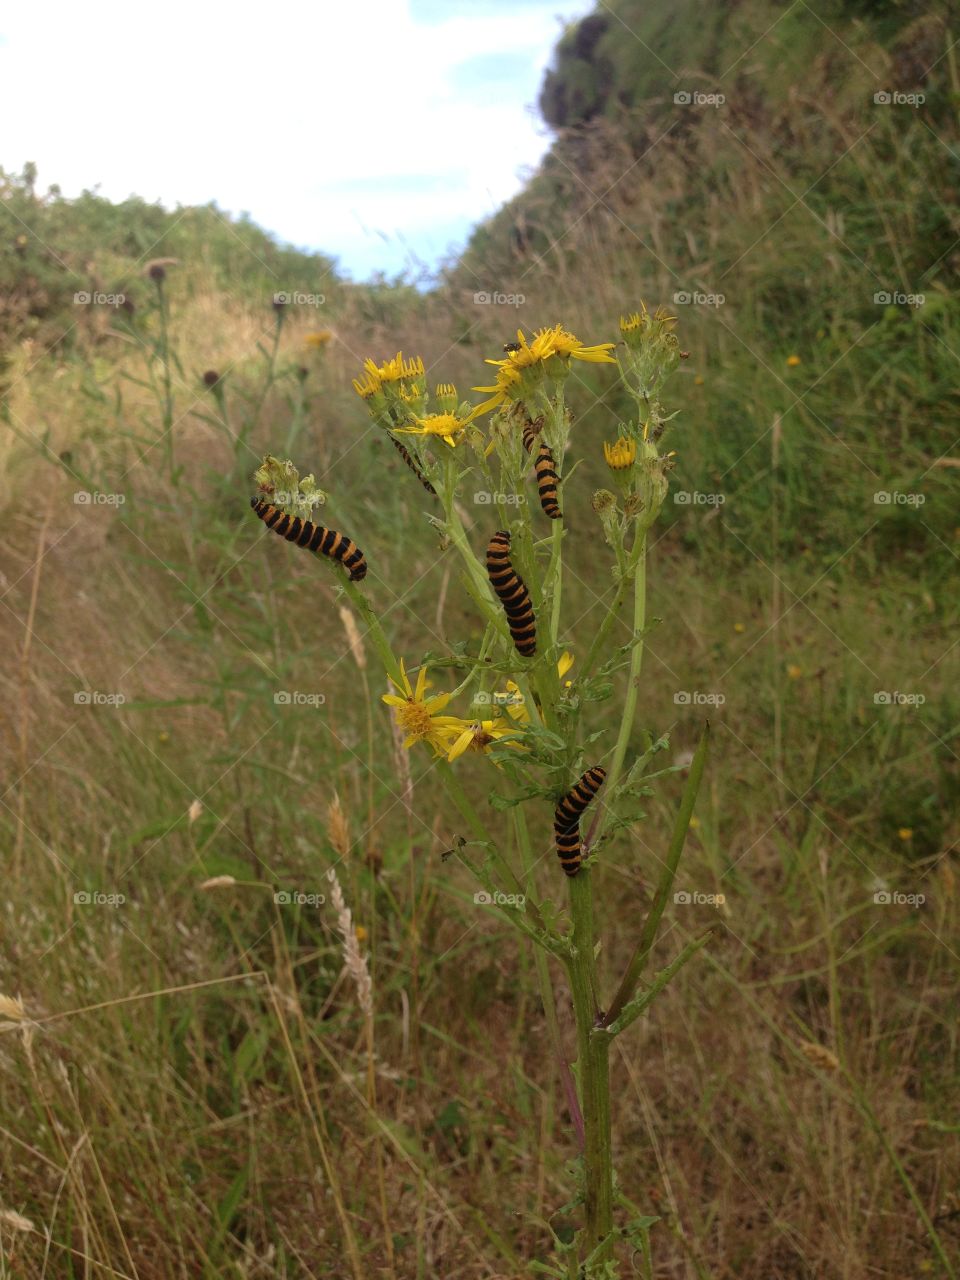 Four black and yellow striped caterpillars  eating their favorite yellow flower. 